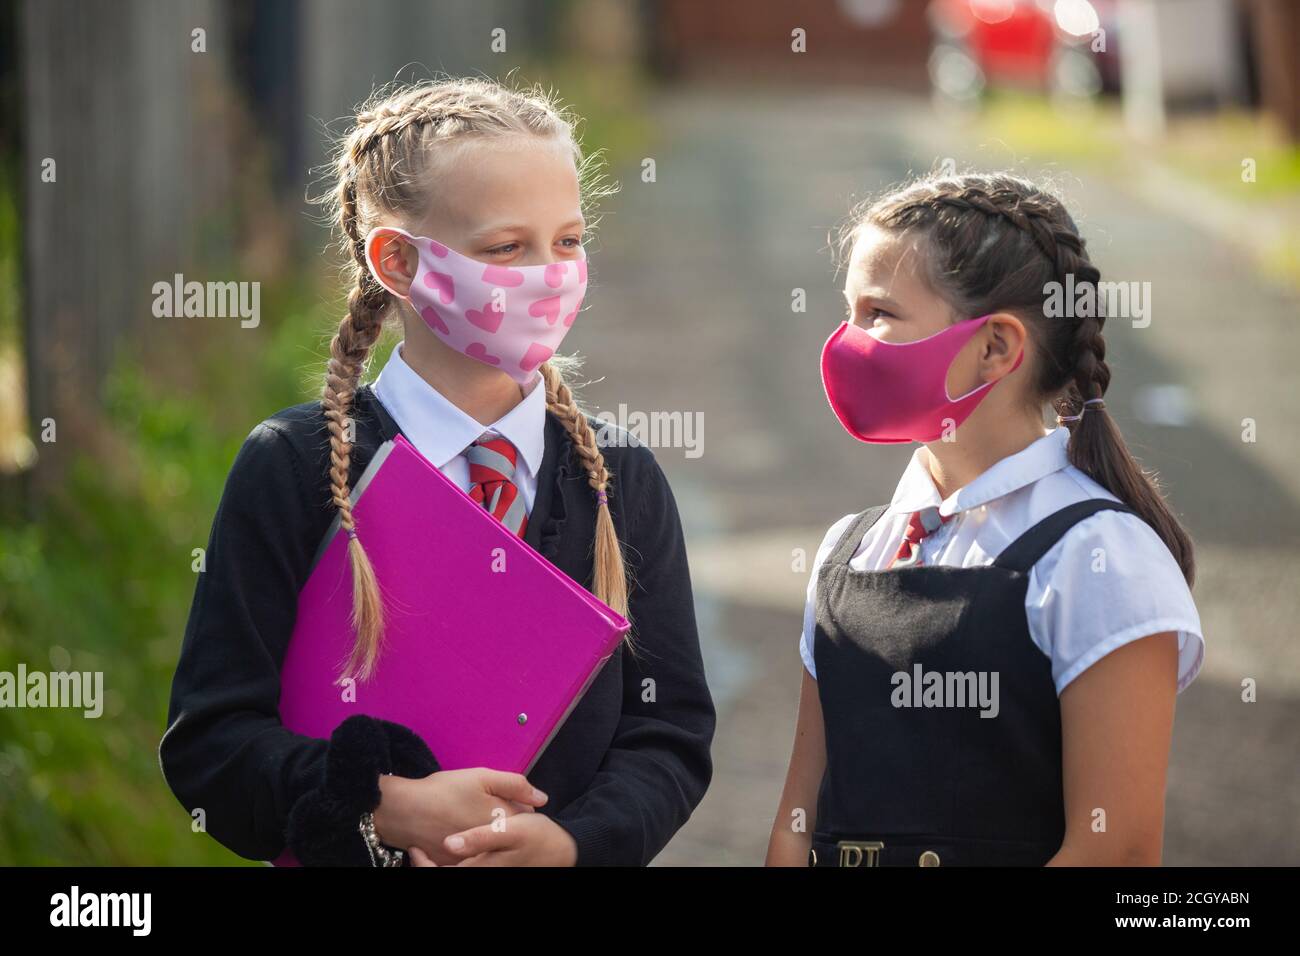 Two 10 year old schoolgirls in school uniform and face masks standing outside looking at each other Stock Photo